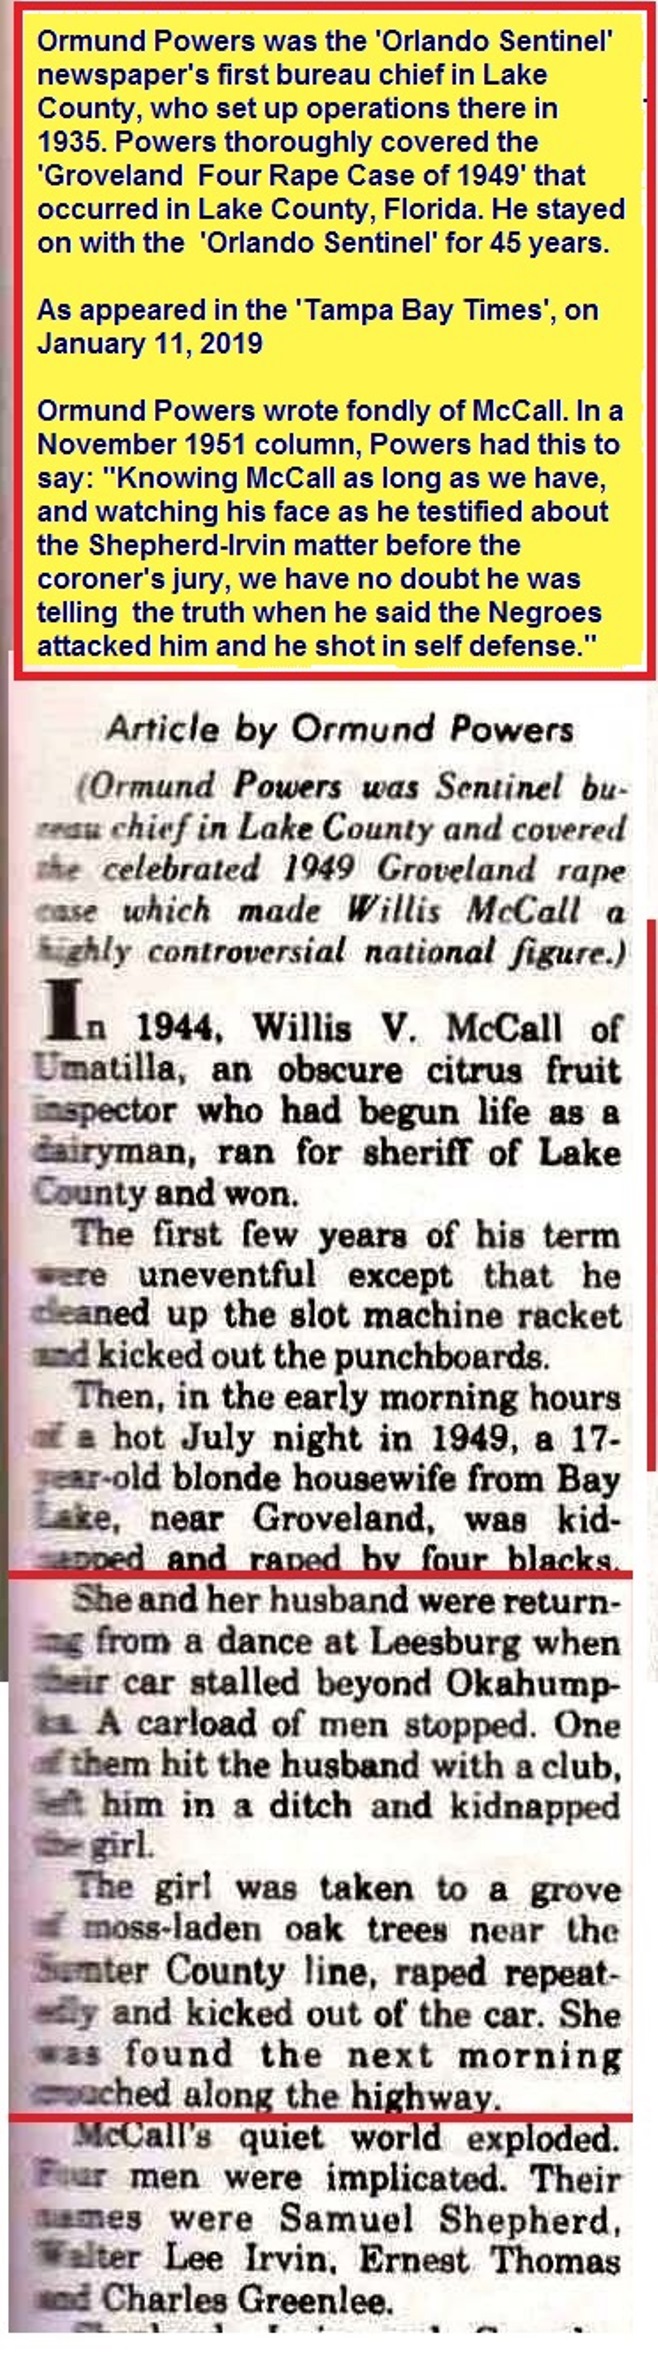 RAPE ACOUNT GROVELAND FOUR  An AUTOBIOGRAPHY BY WILLIS V. MCCALL SHERIFF OF LAKE COUNTY 1945-1972